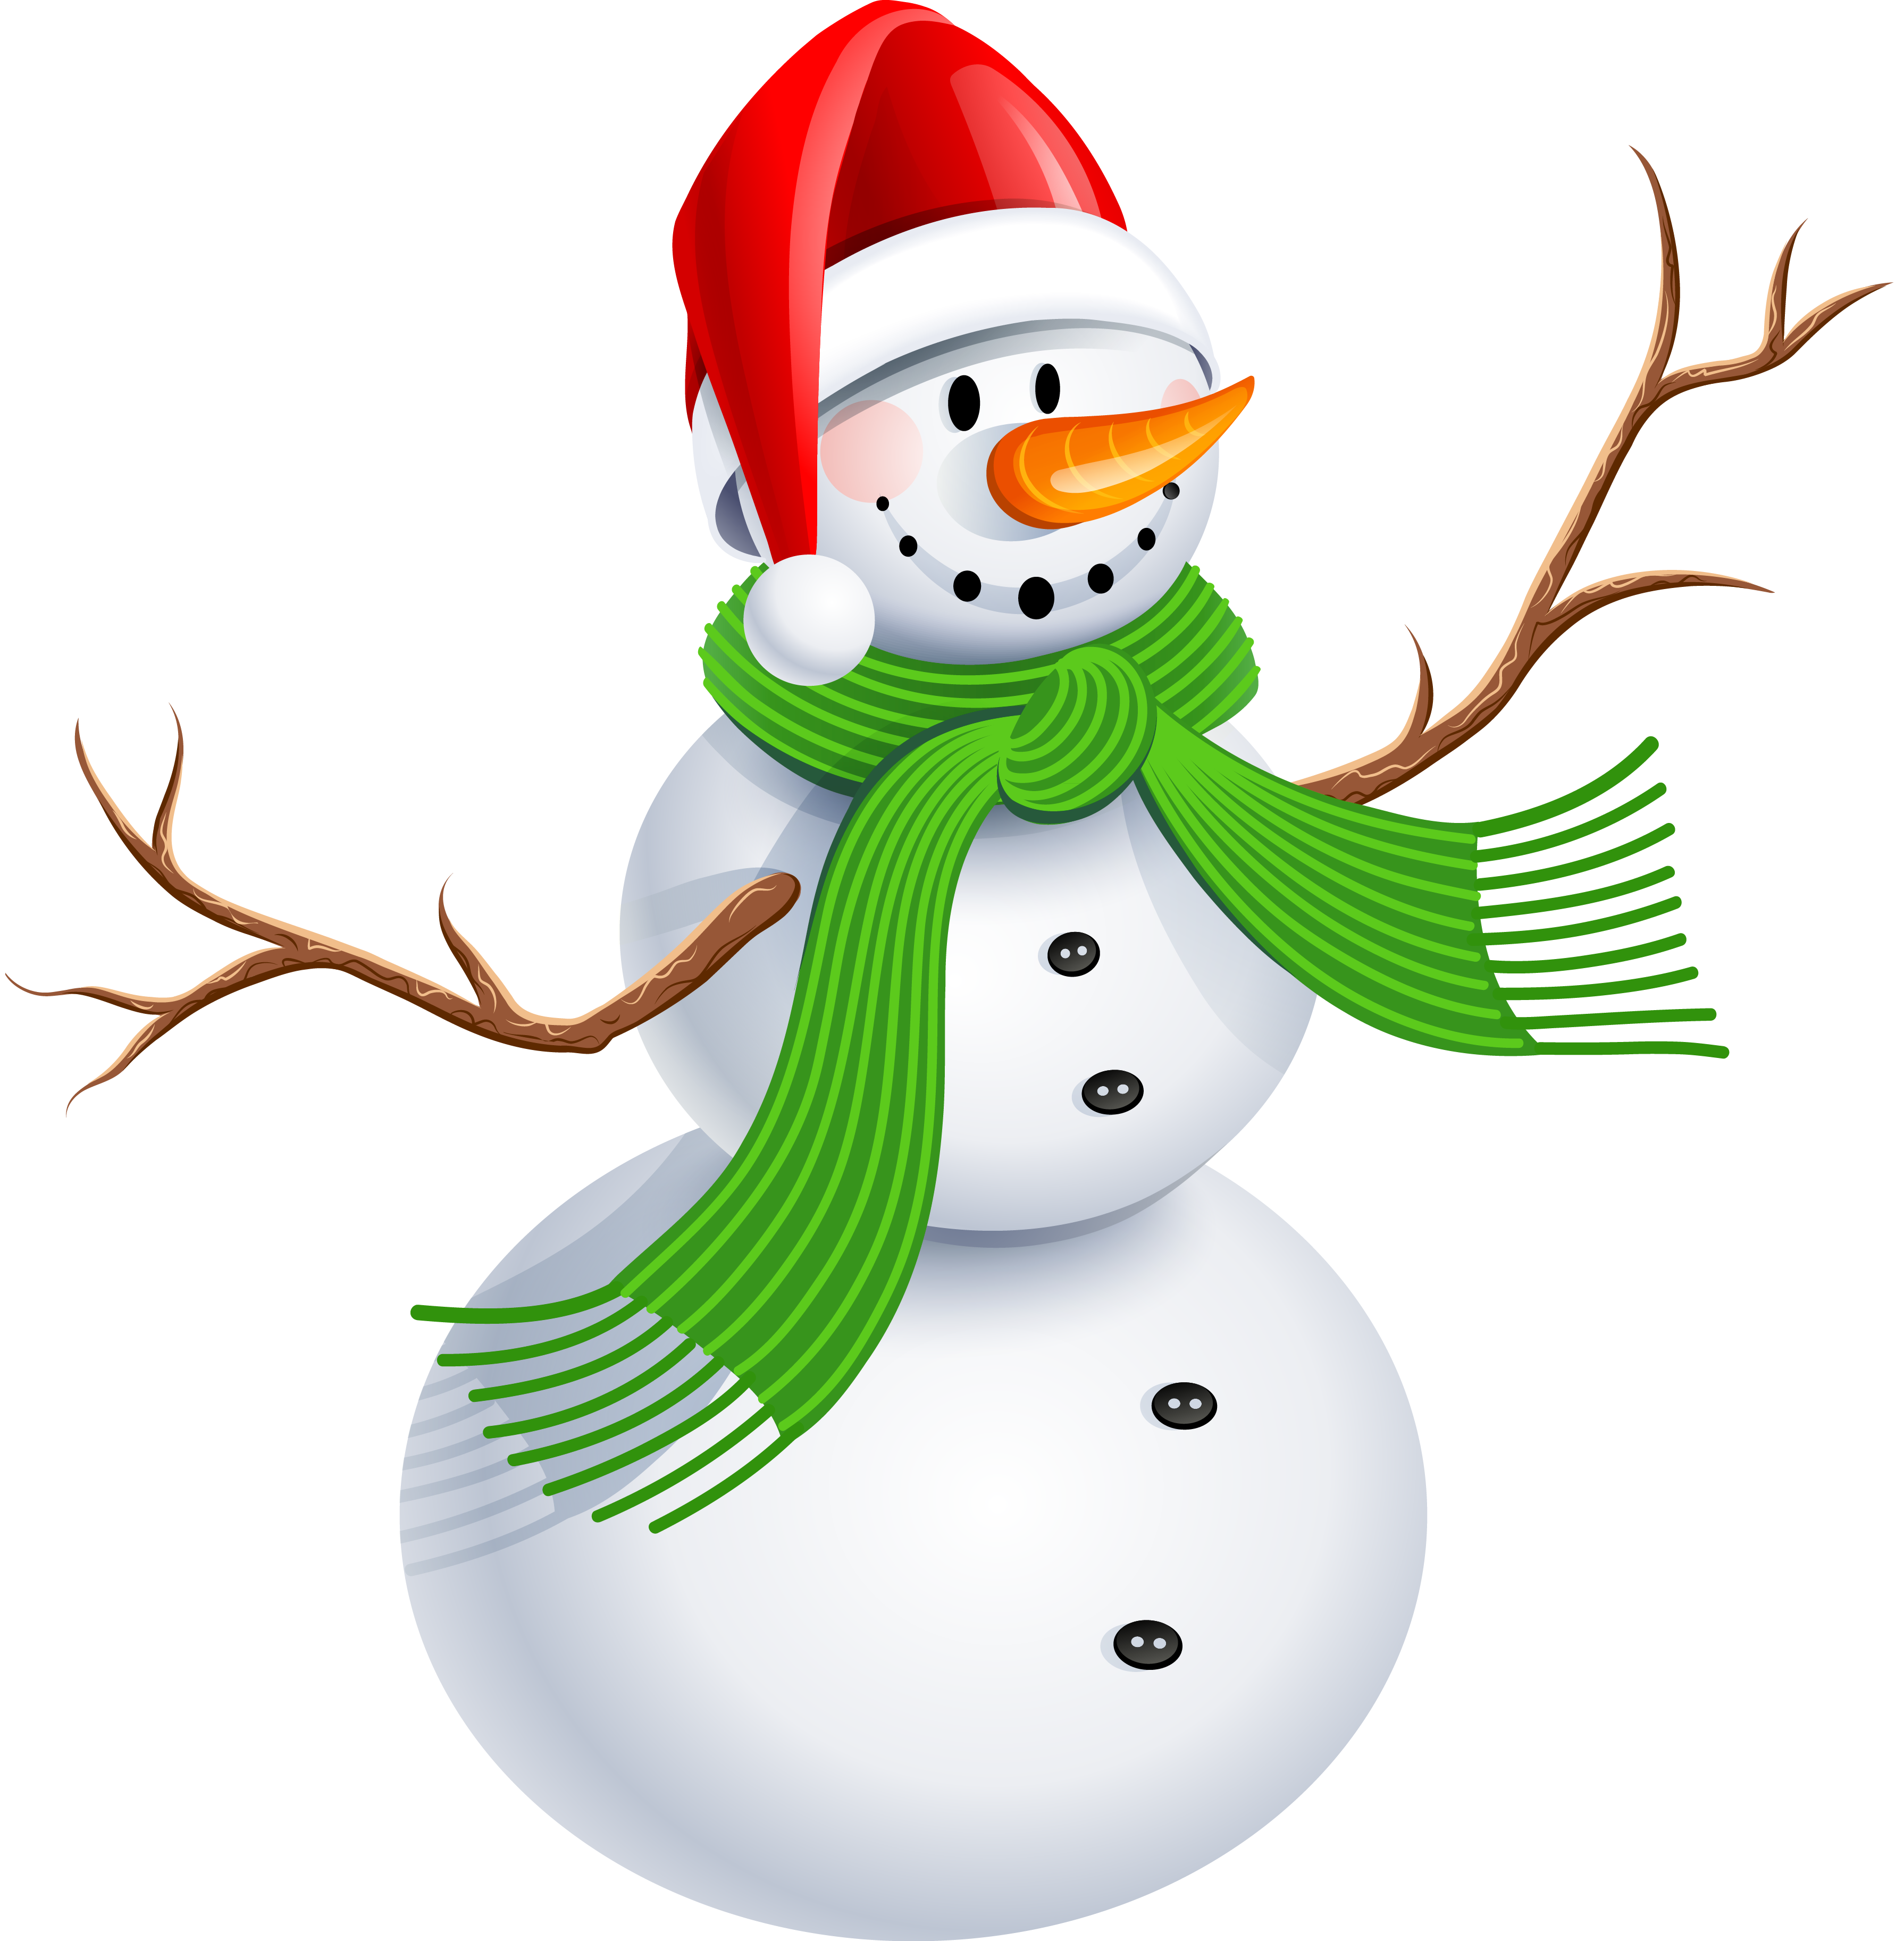 free clipart images of a snowman - photo #36